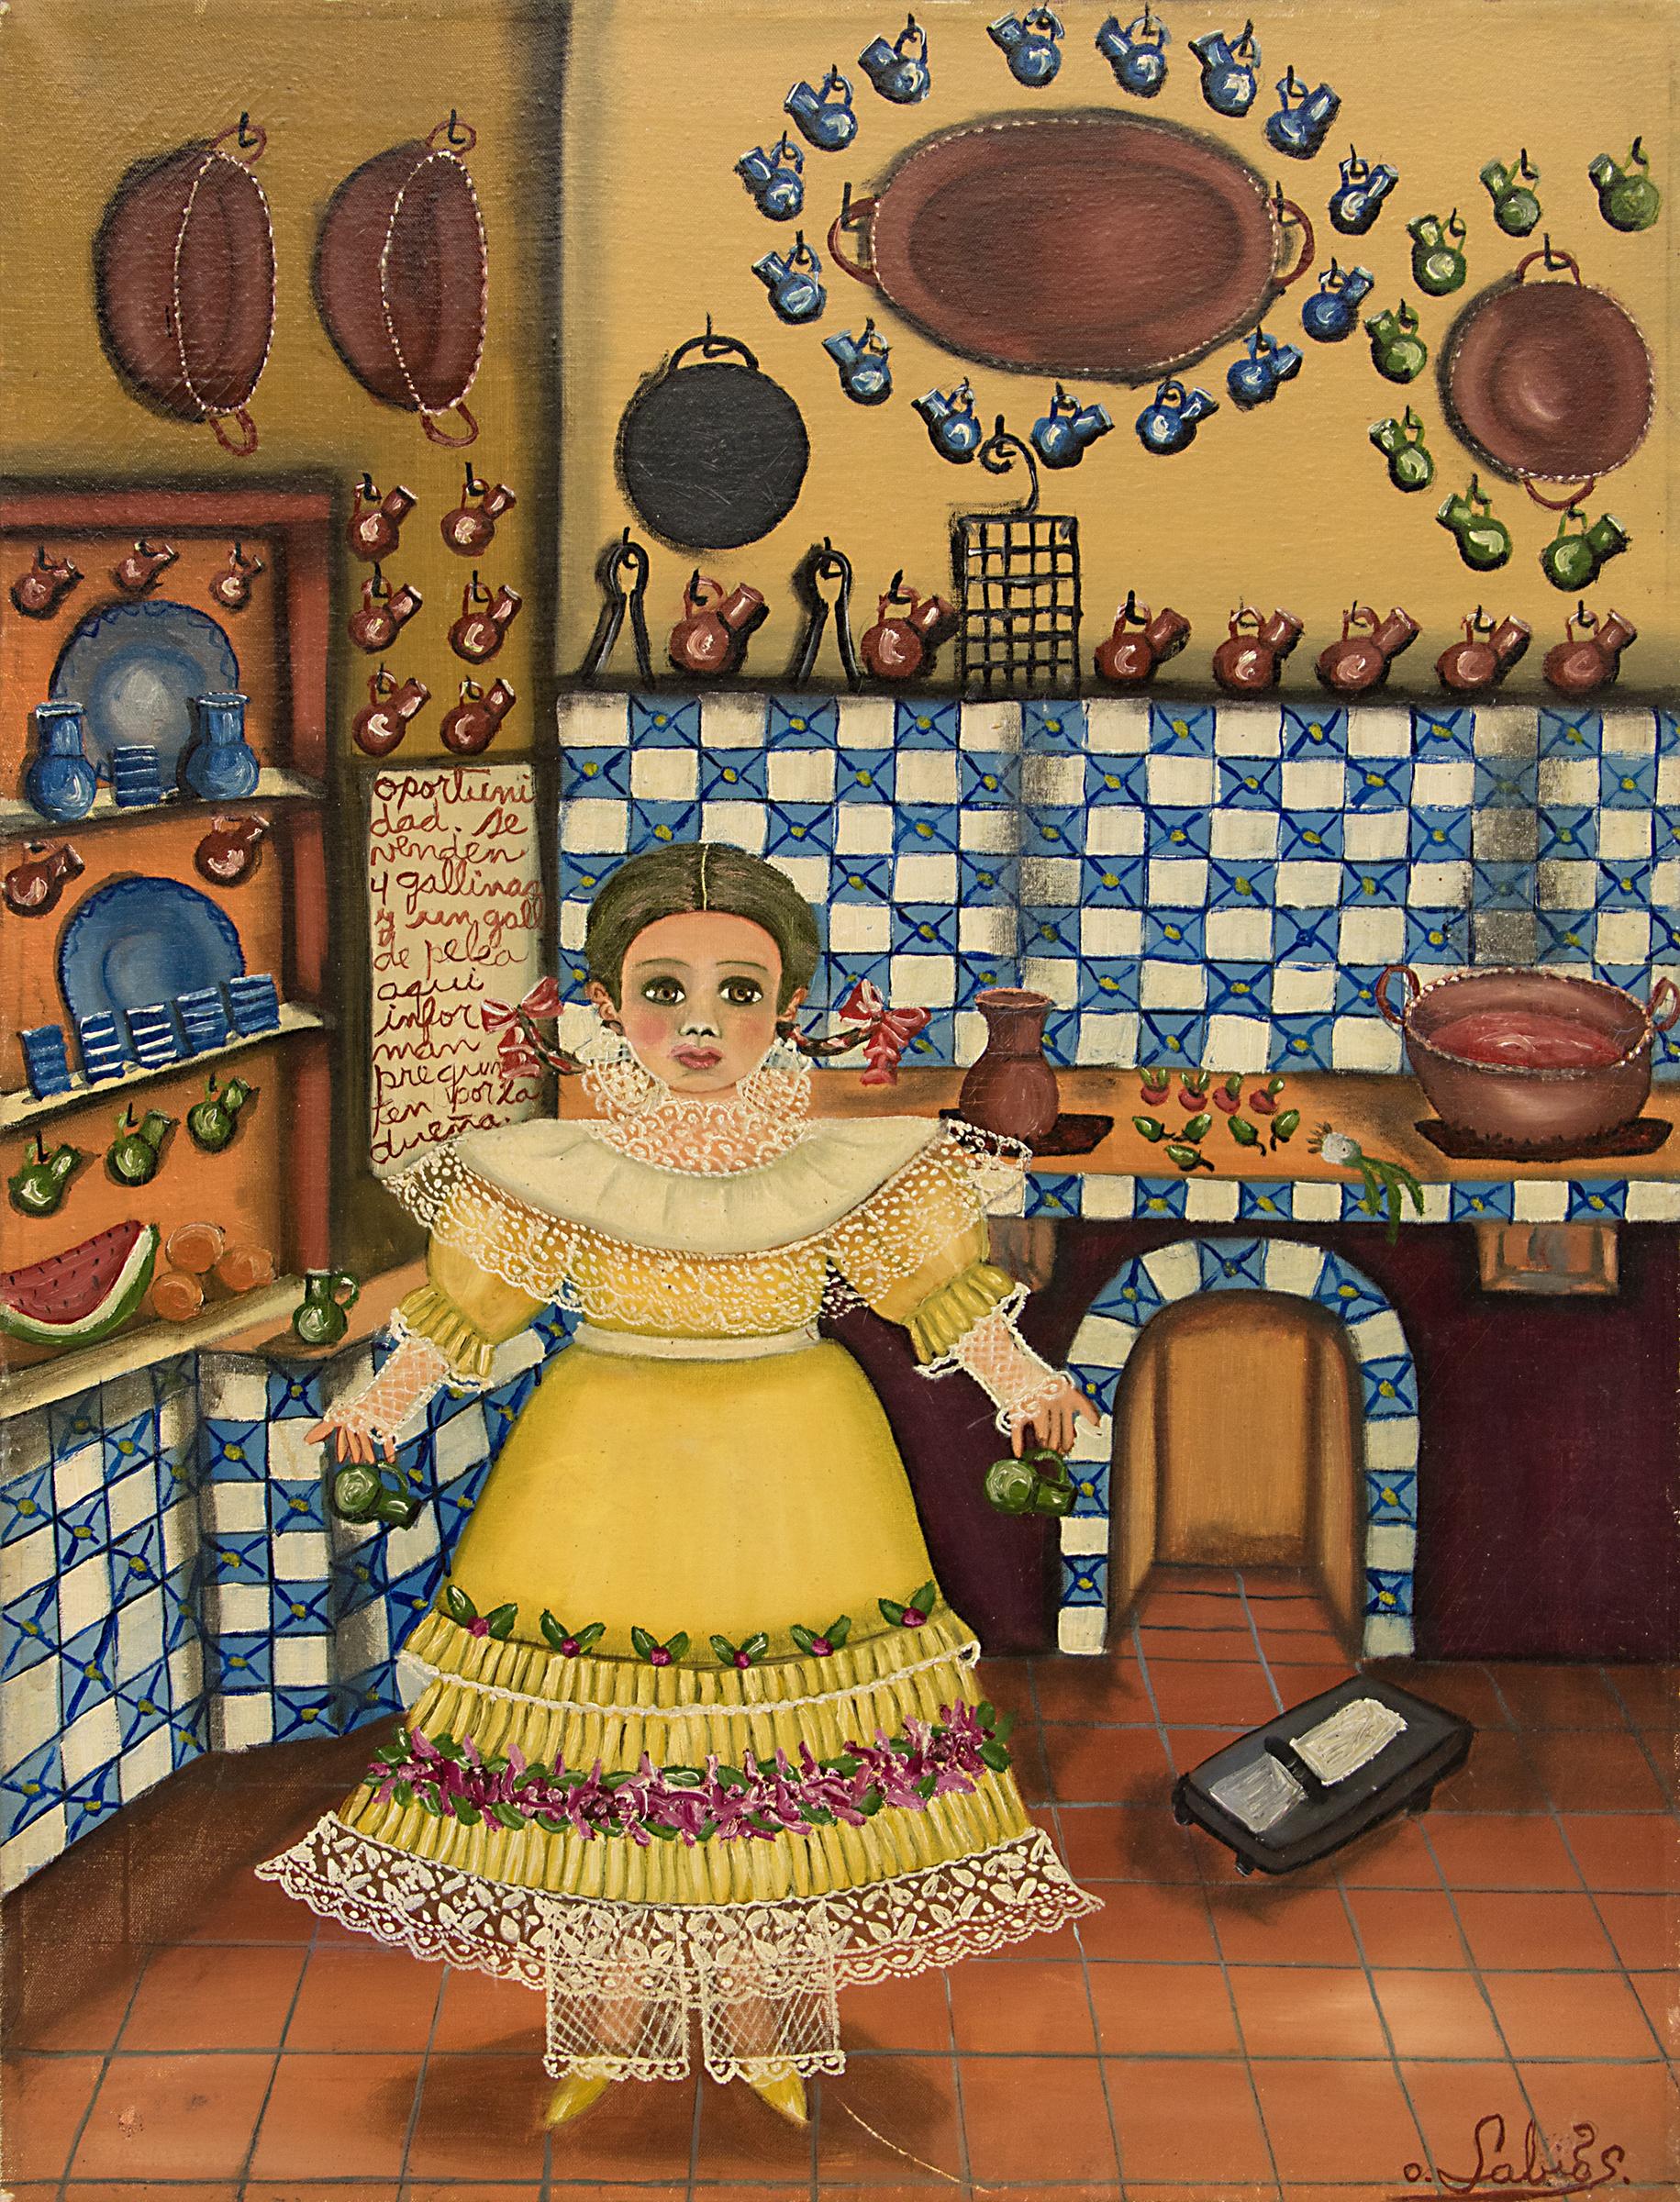 Untitled (Girl in the Kitchen) - Painting by Agapito Labios